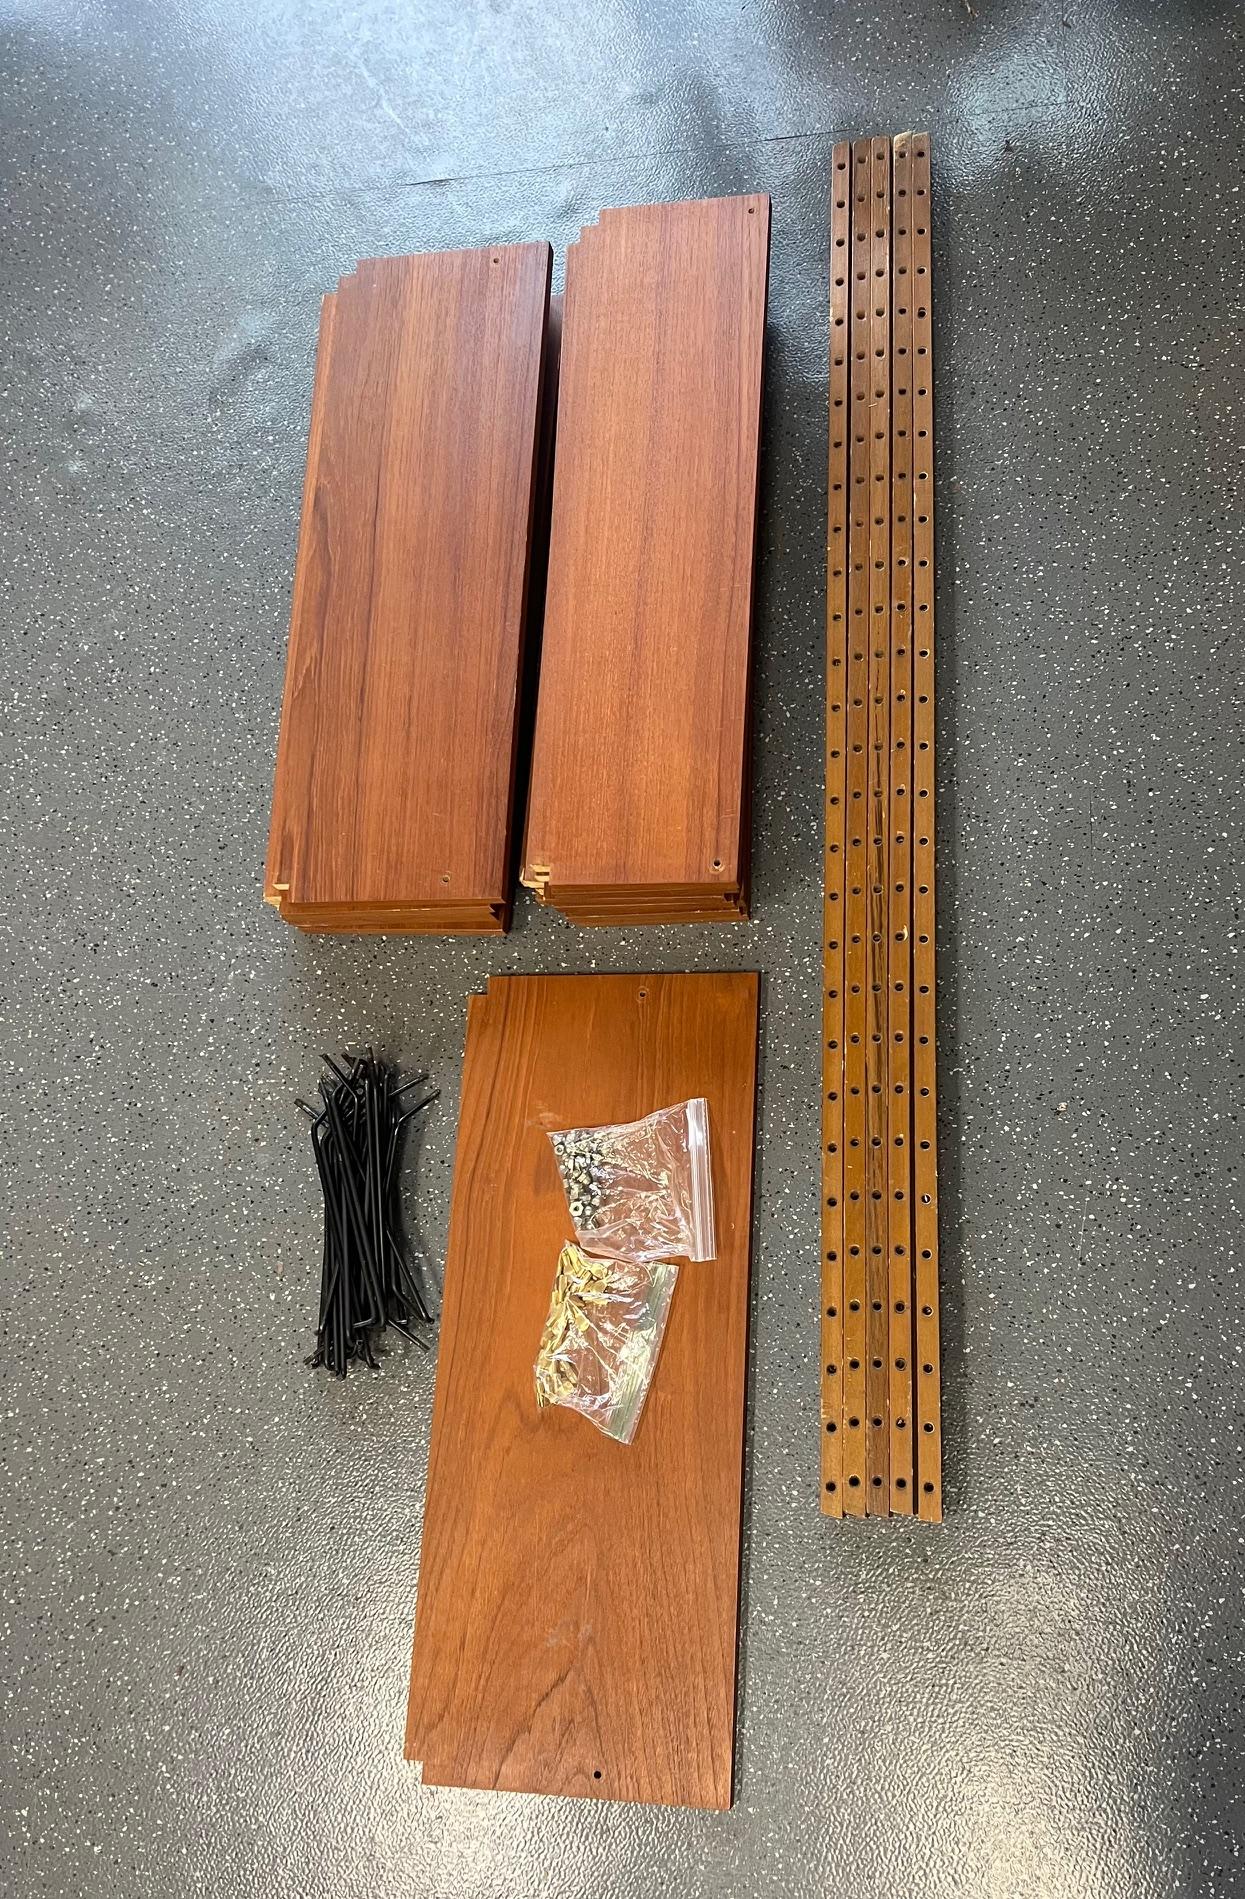 This is a stunning mid century teak shelving system. Made in Denmark. Similar to Cadovius units.

It is a modular unit. You can arrange it in many different ways.

It consists of 5 poles and 15 shelves, All hardware included.

Very good vintage